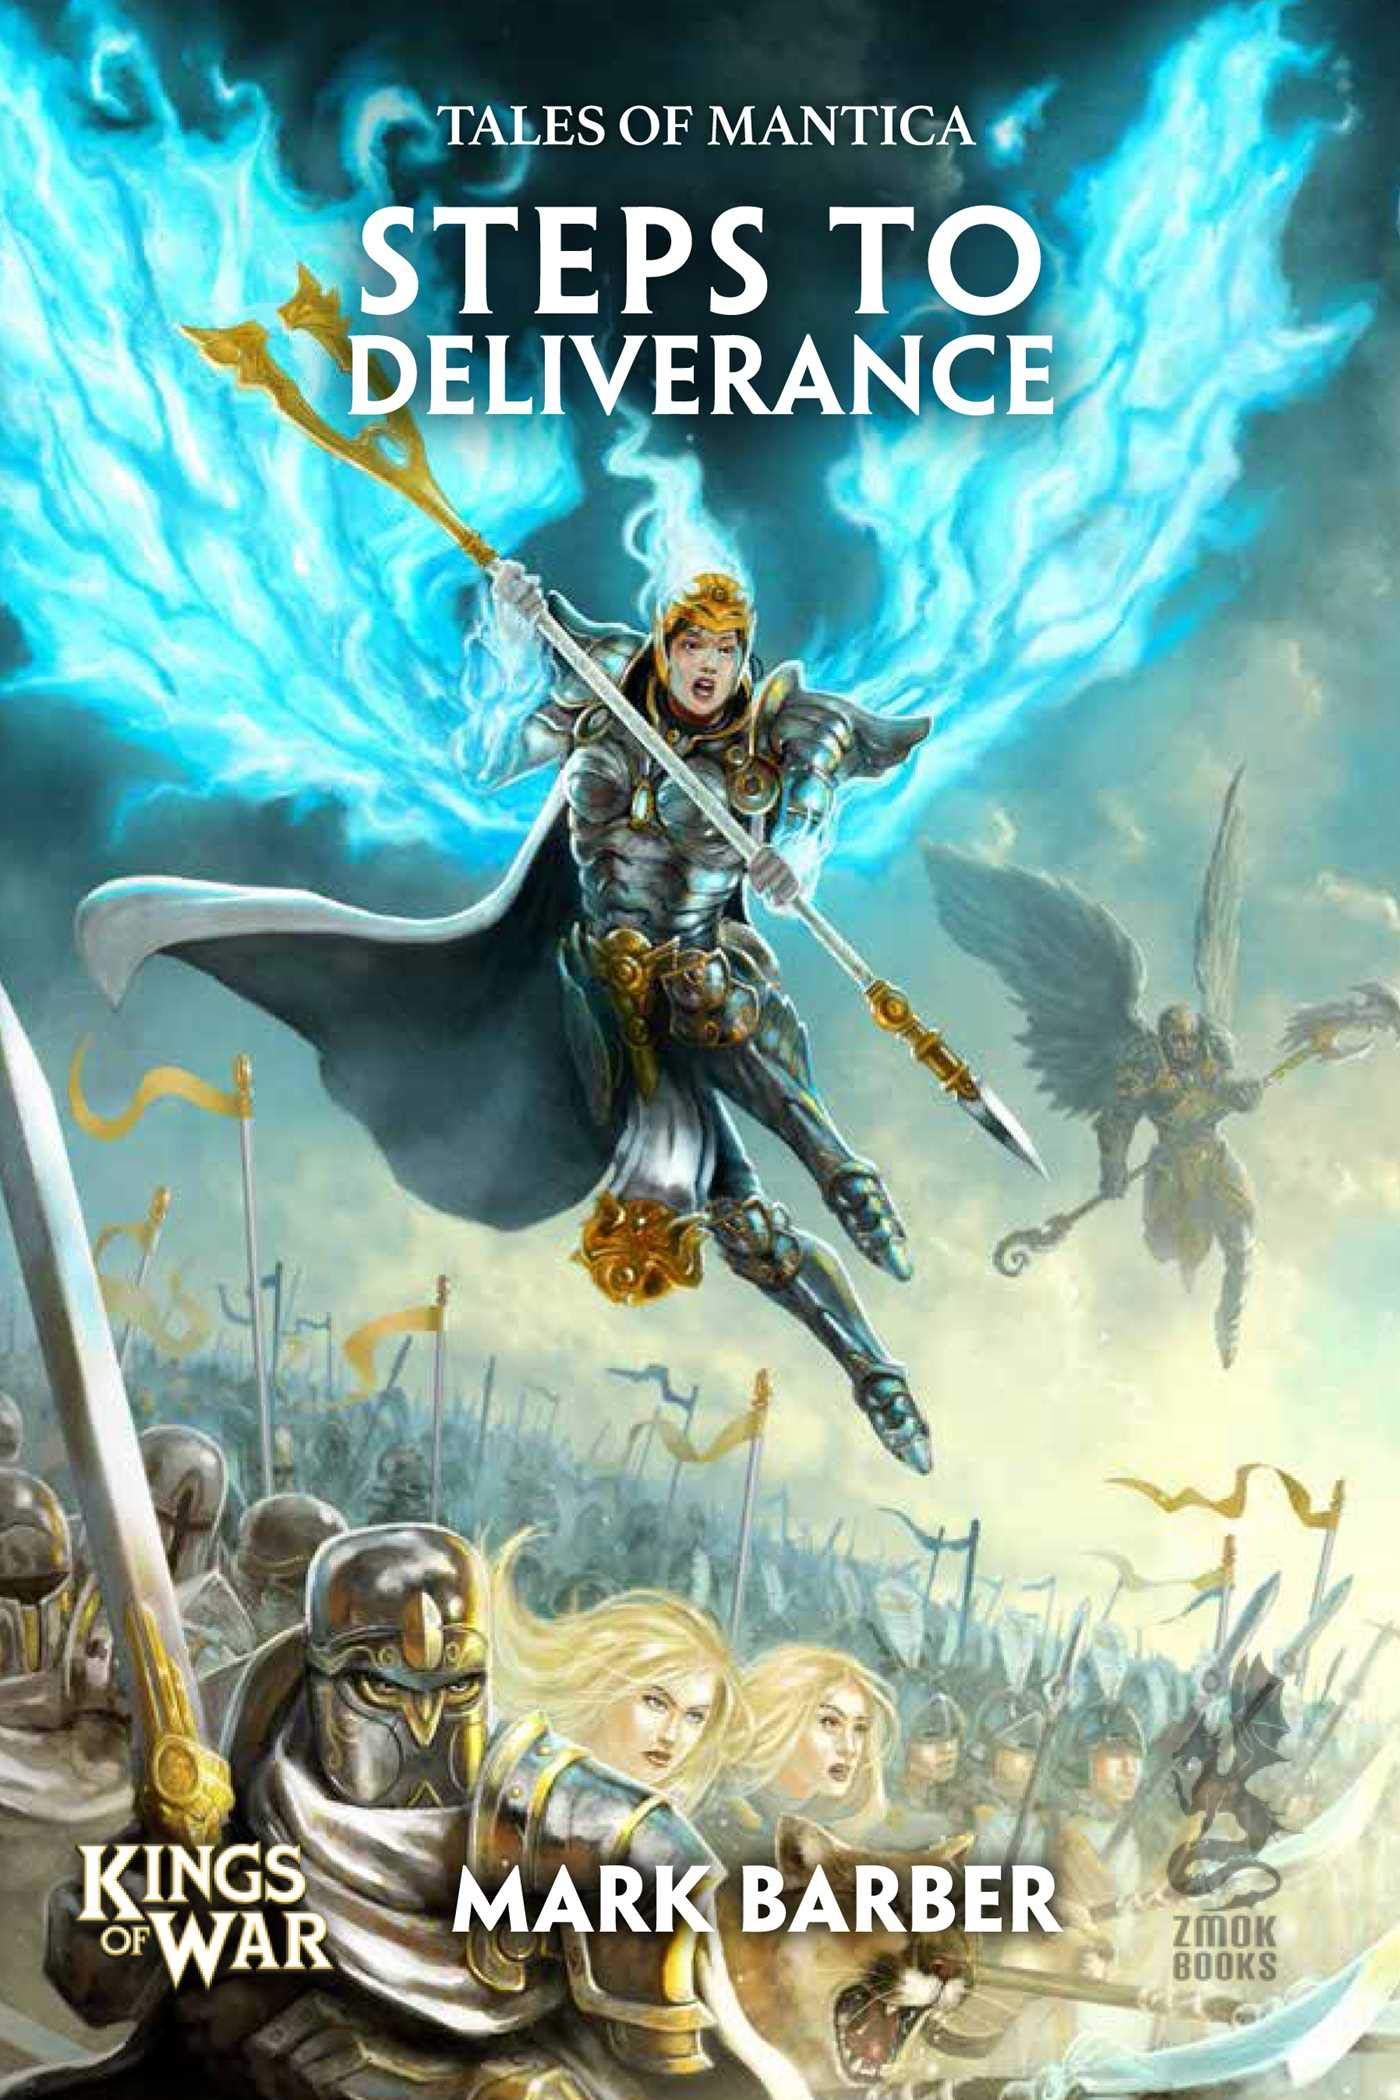 Author’s Notes: Steps to Deliverance